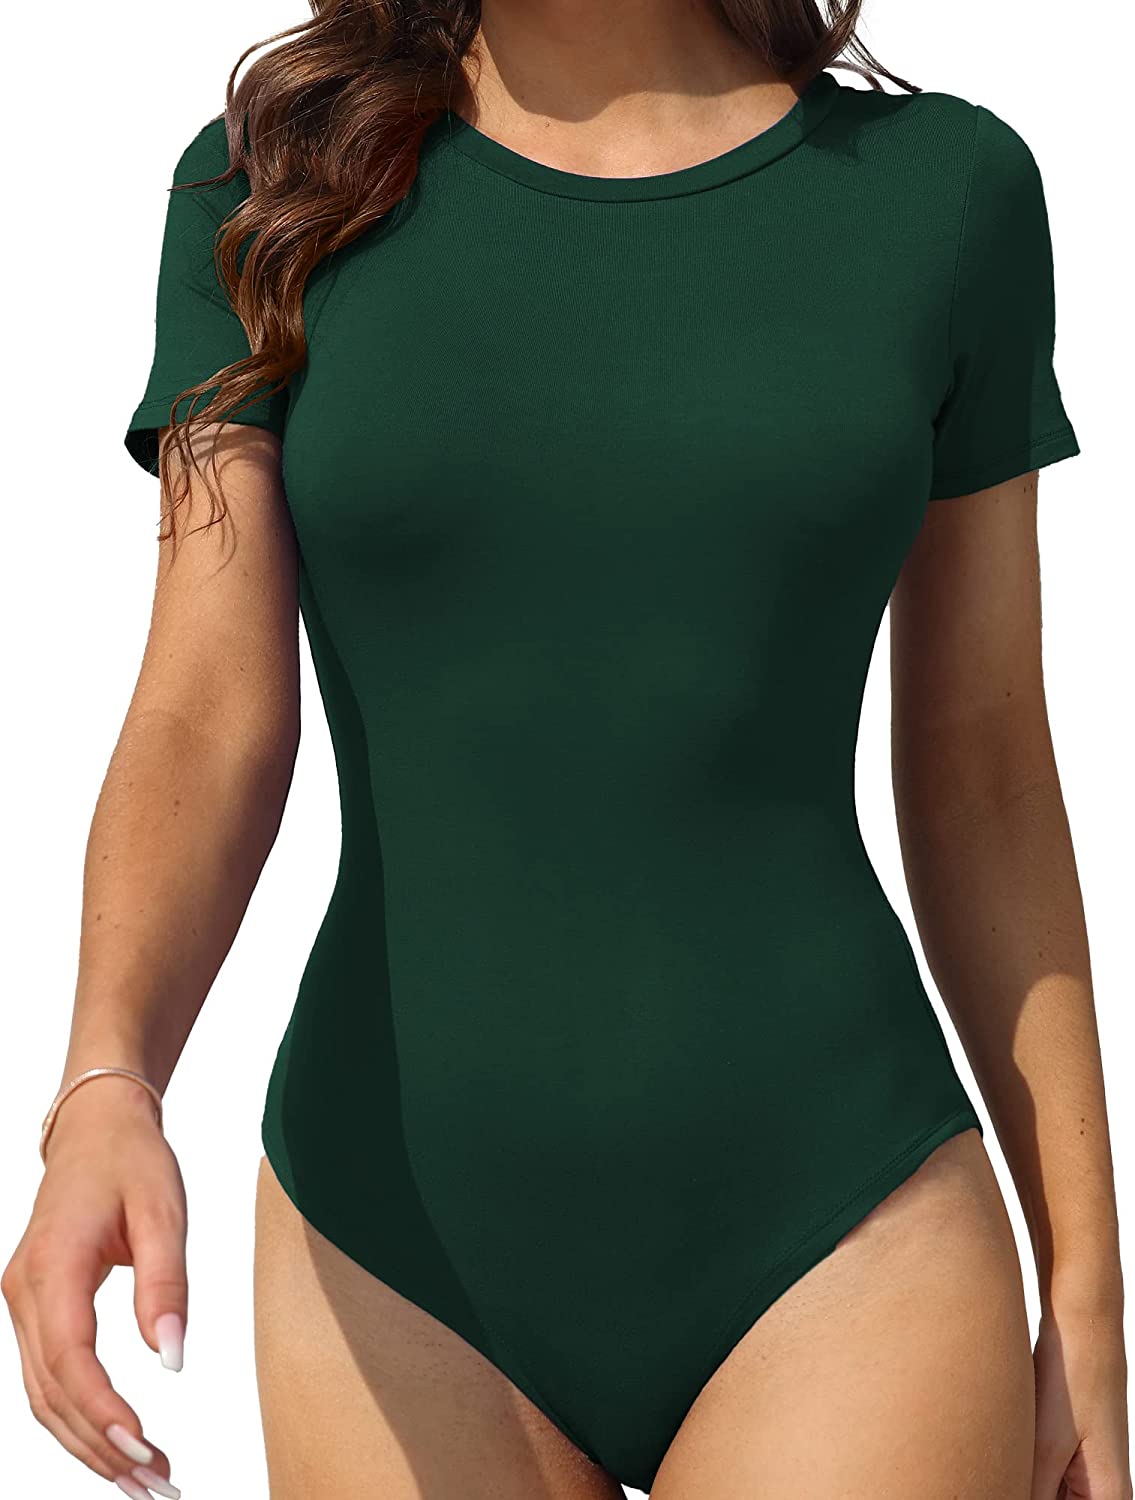  LAOLASI Women's Crew Neck Long Sleeve Slim Fit Body Suit Basic  Round Neck Bodysuit Daily Shirts Tops, Dark Green, X-Small : Clothing,  Shoes & Jewelry